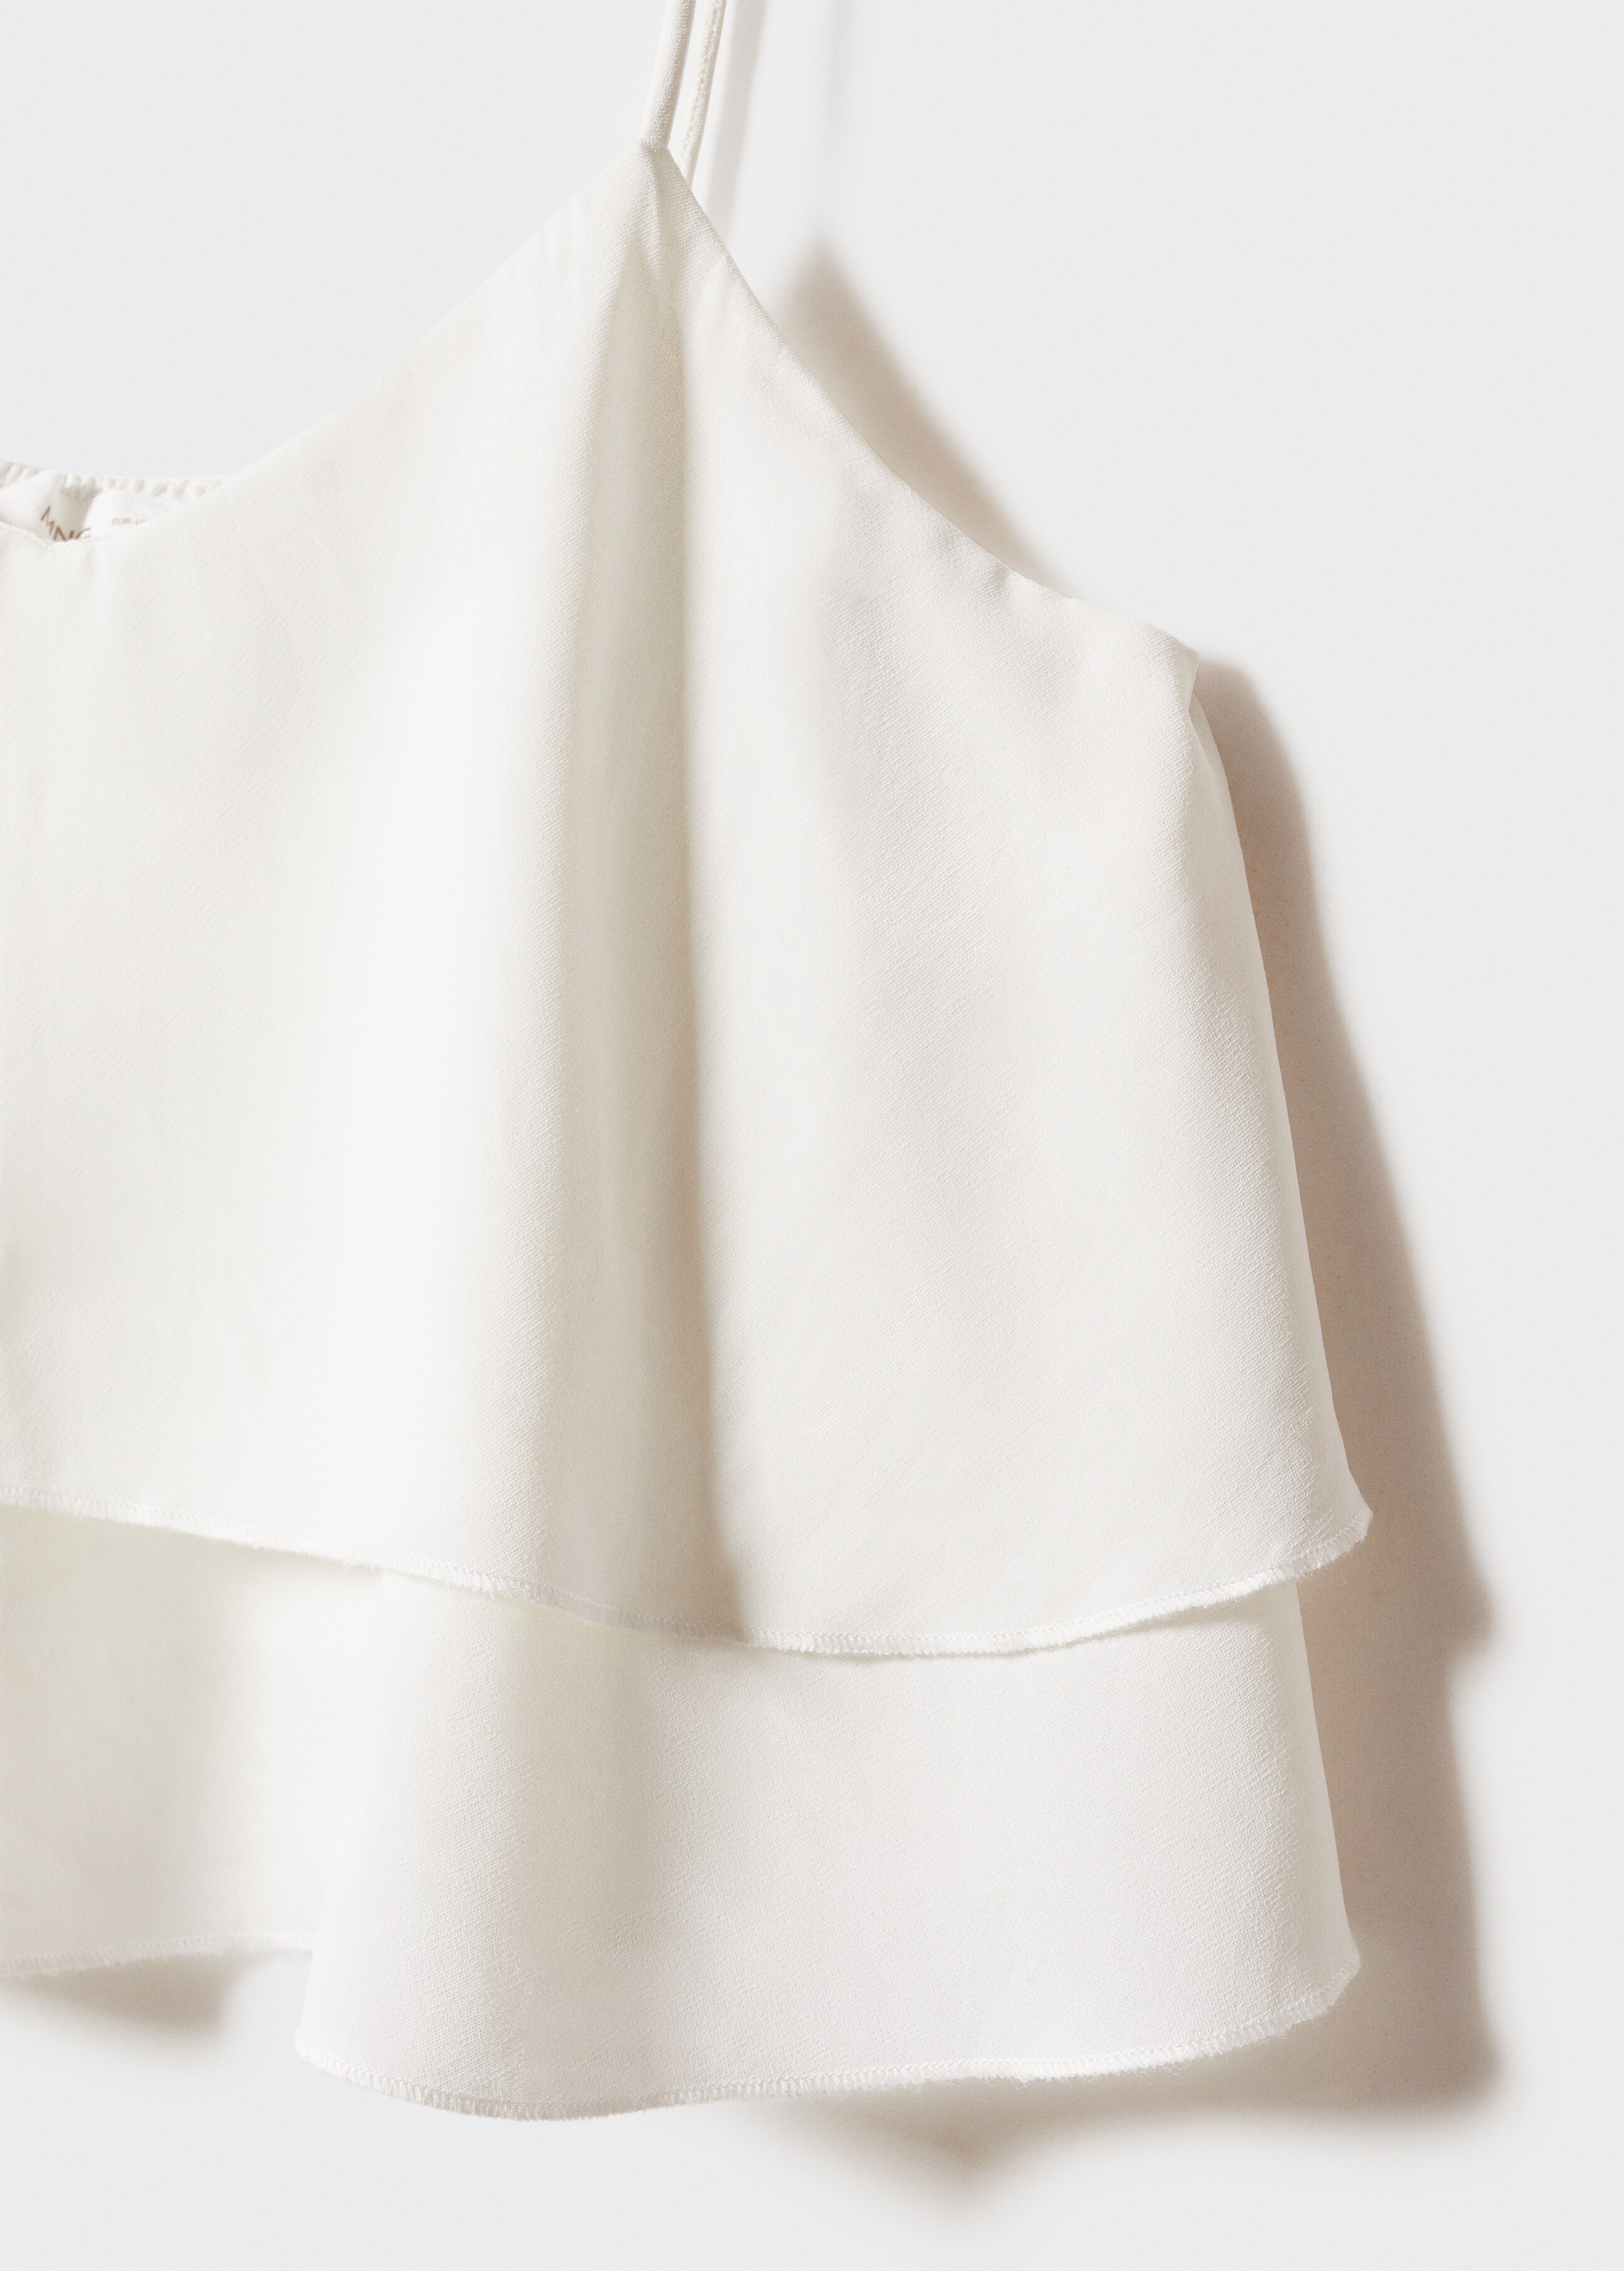 Ruffled blouse - Details of the article 8